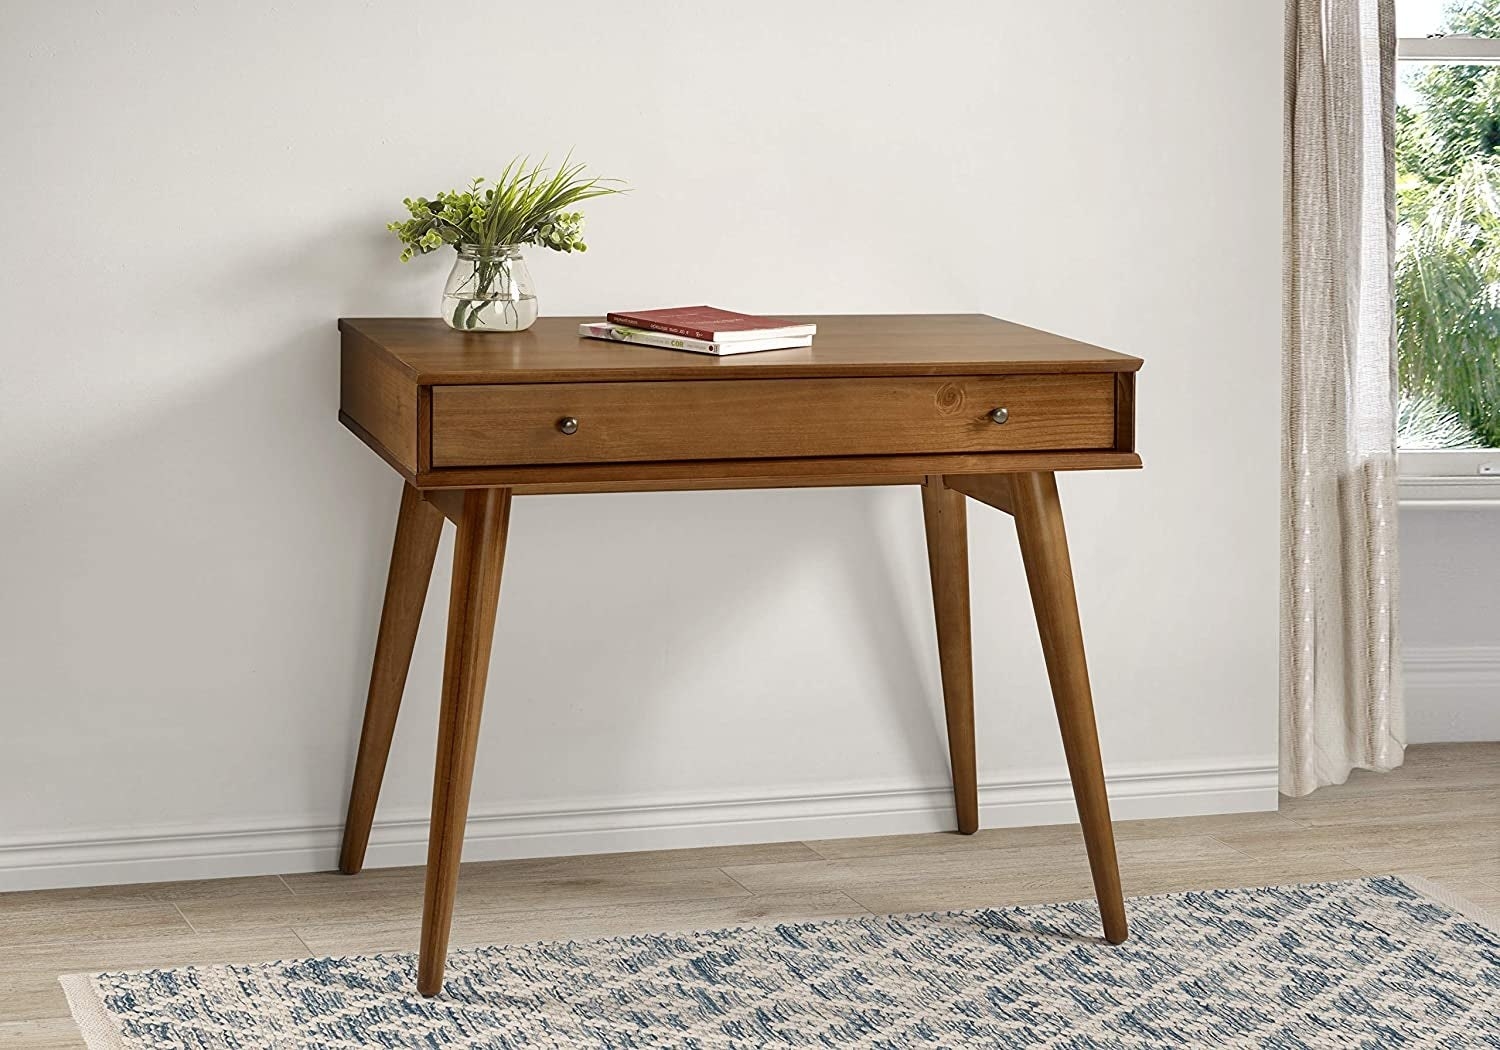 the walnut desk against a white wall